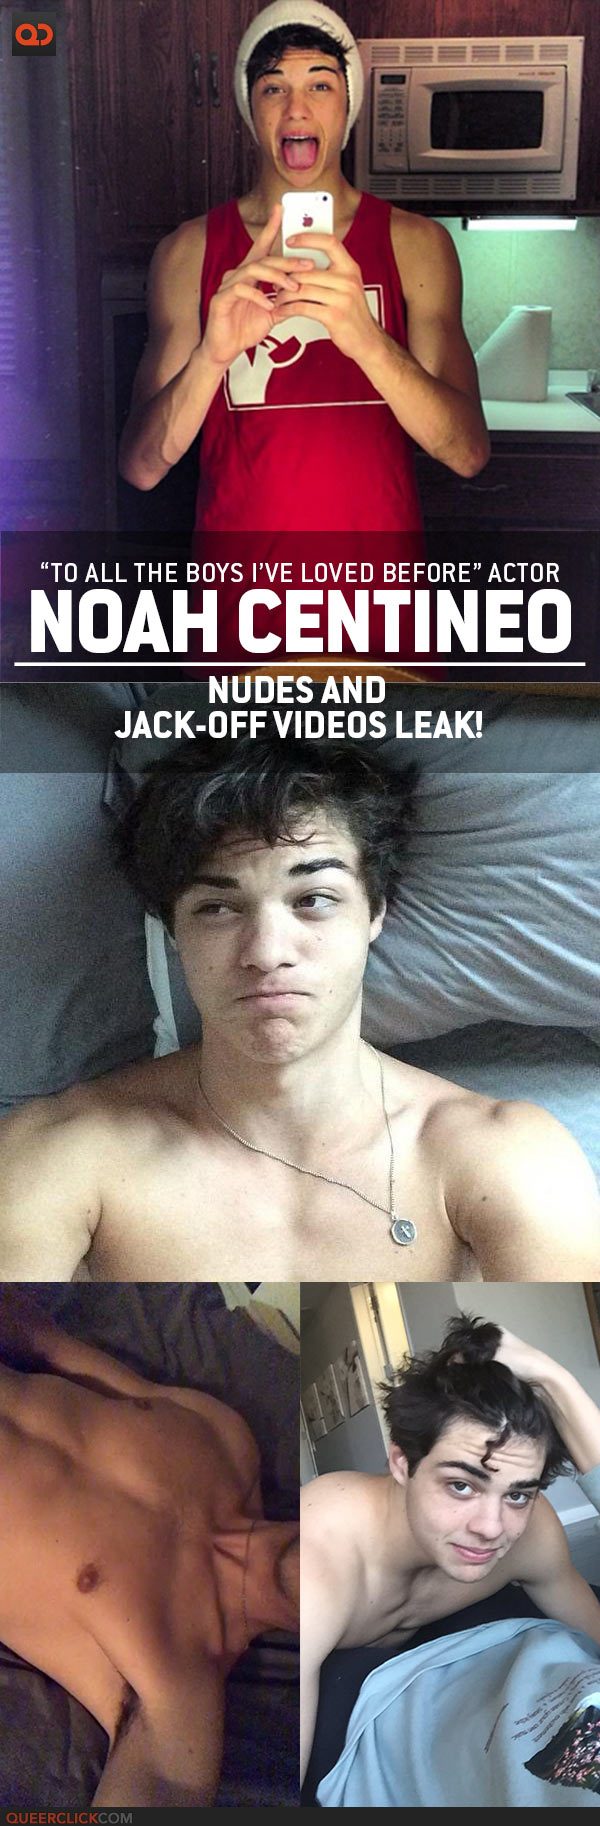 Fyithe Truth Behind Noah Centineo's Leaked Video Scandal